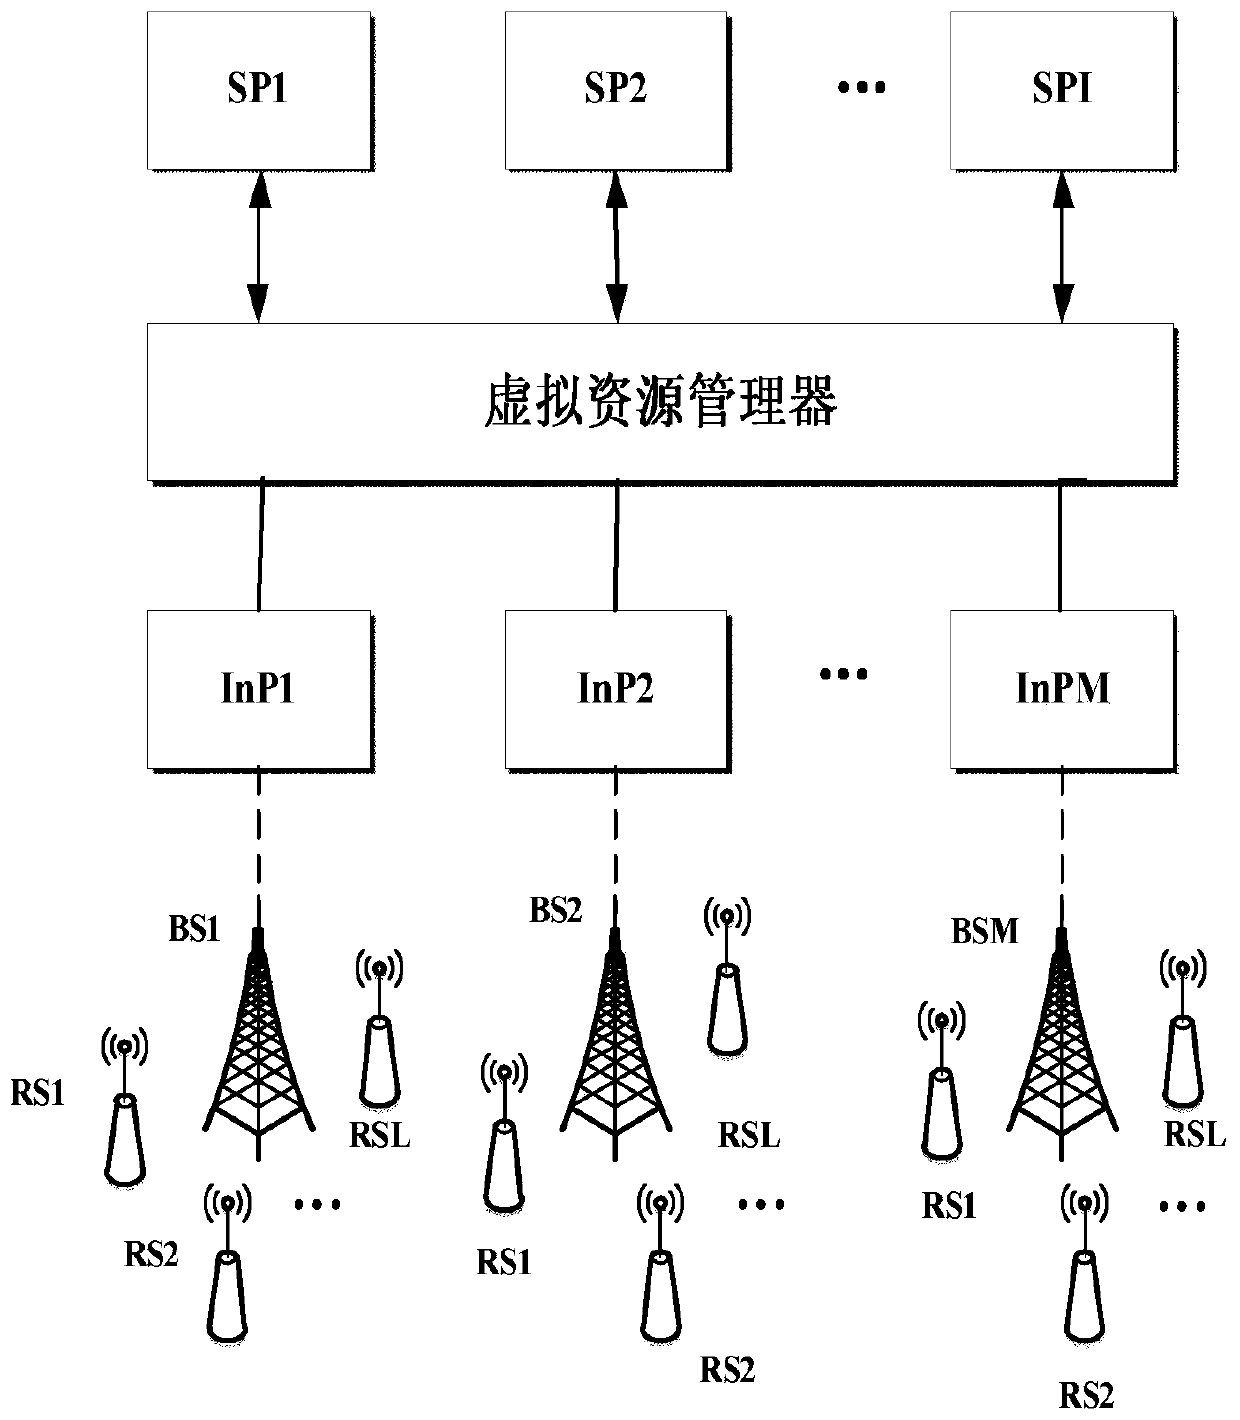 A wireless virtualization resource management and allocation method based on relay network